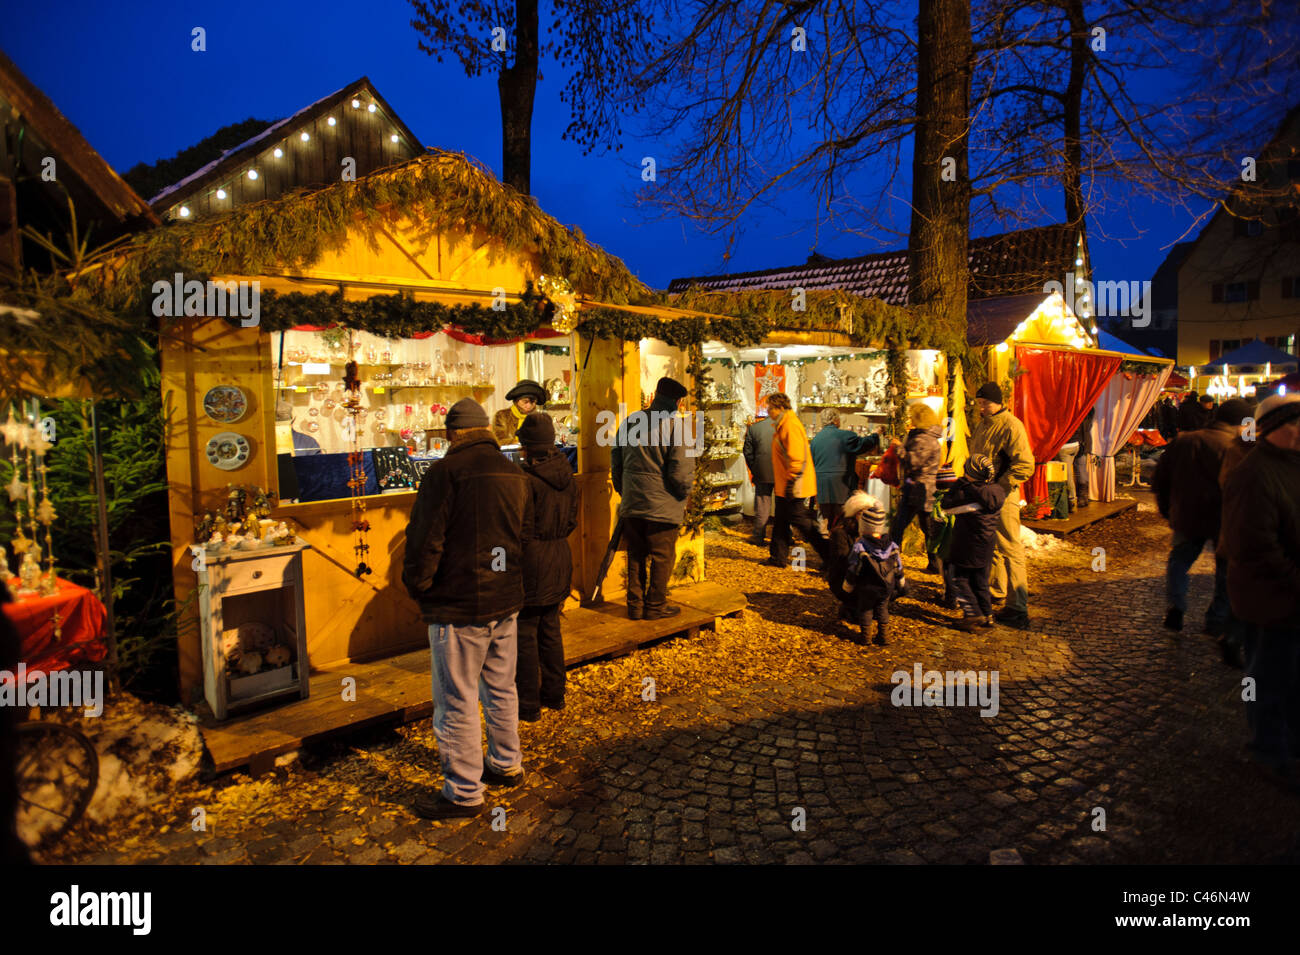 Christmas market at night in city Dinkelsbuehl in Germany, Bavaria, with illuminated shops Stock Photo